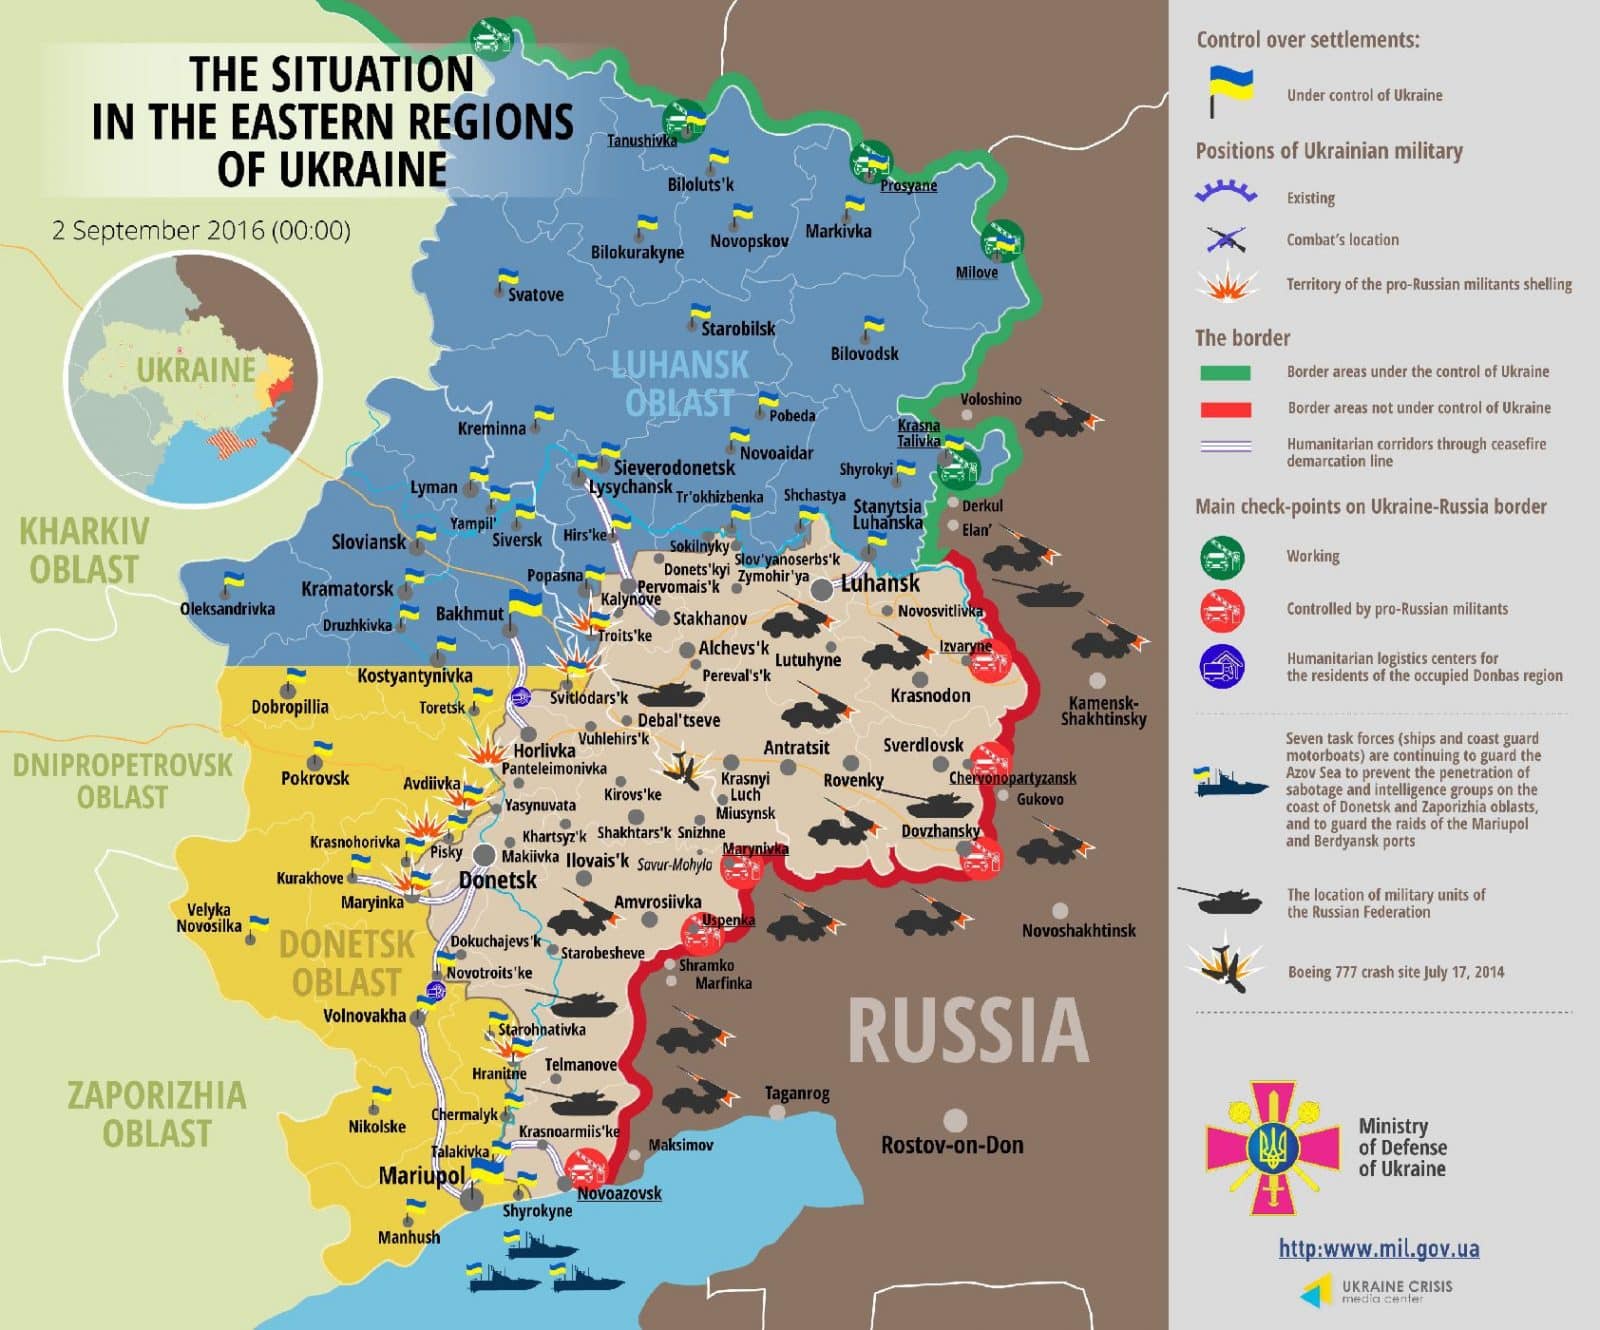 ”Silence mode in Donbas”: Russian troops attack 11 times in past 24 hours, Ukraine army is restricted to open fire in response